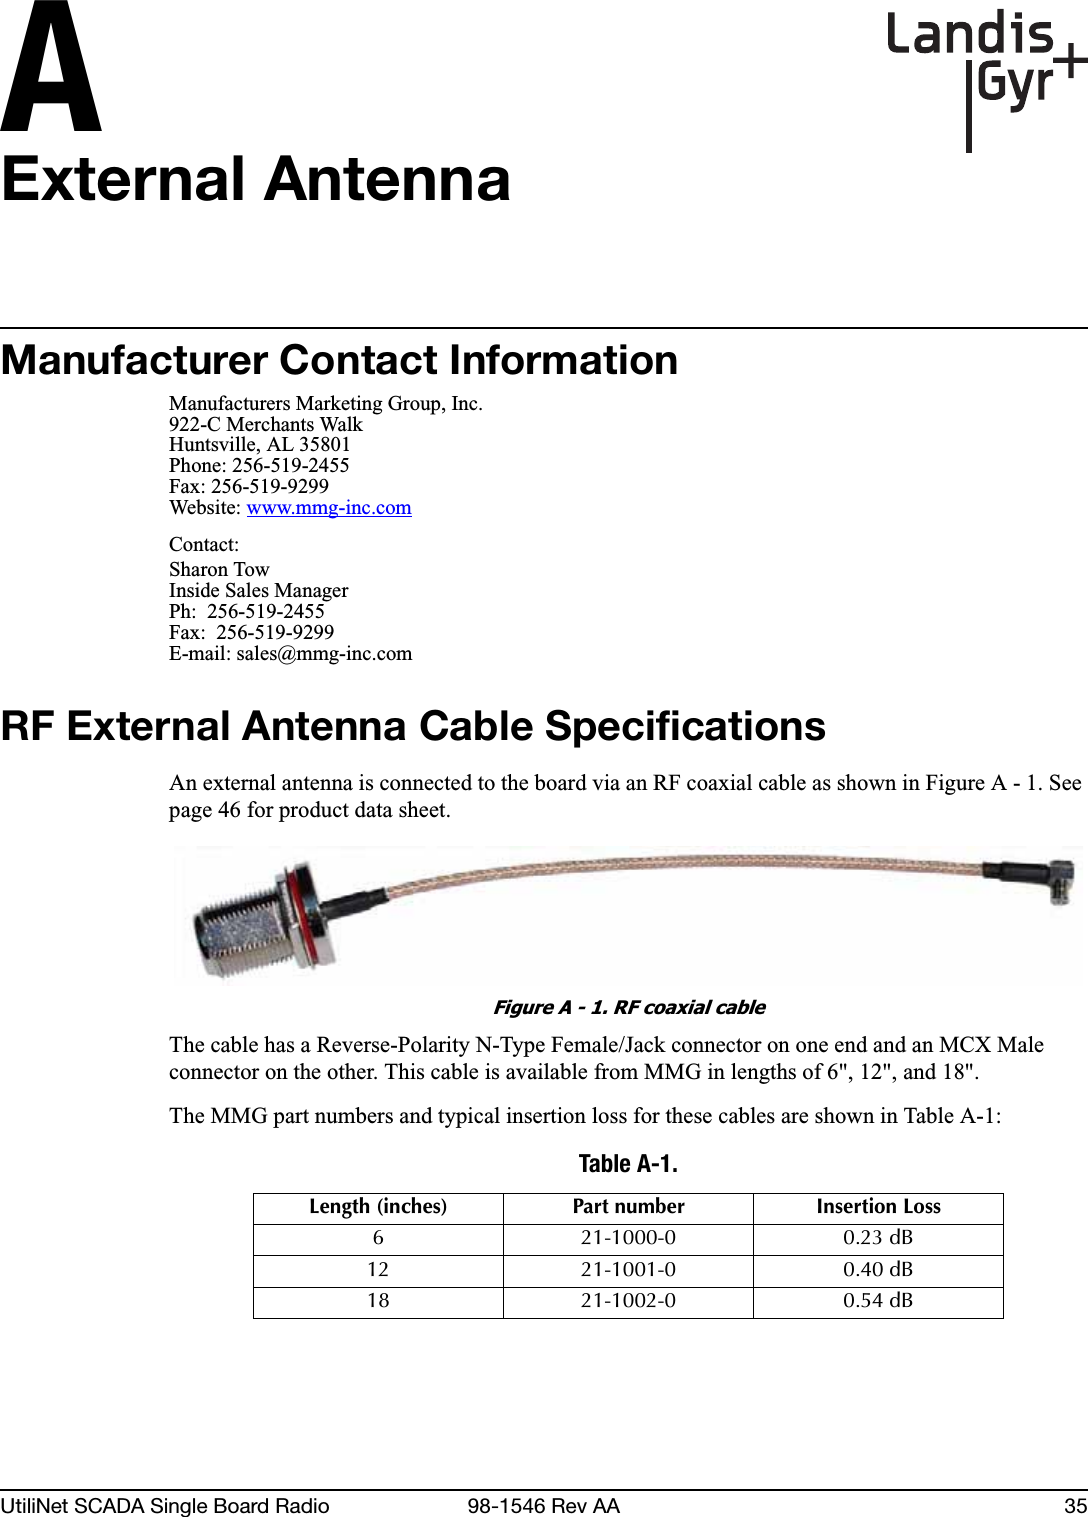 AUtiliNet SCADA Single Board Radio 98-1546 Rev AA 35External AntennaManufacturer Contact InformationManufacturers Marketing Group, Inc.922-C Merchants WalkHuntsville, AL 35801Phone: 256-519-2455Fax: 256-519-9299Website: www.mmg-inc.comContact:Sharon TowInside Sales ManagerPh:  256-519-2455Fax:  256-519-9299E-mail: sales@mmg-inc.comRF External Antenna Cable SpecificationsAn external antenna is connected to the board via an RF coaxial cable as shown in Figure A - 1. See page 46 for product data sheet.Figure A - 1. RF coaxial cableThe cable has a Reverse-Polarity N-Type Female/Jack connector on one end and an MCX Male connector on the other. This cable is available from MMG in lengths of 6&quot;, 12&quot;, and 18&quot;.The MMG part numbers and typical insertion loss for these cables are shown in Table A-1:Table A-1. Length (inches) Part number Insertion Loss6 21-1000-0 0.23 dB12 21-1001-0 0.40 dB18 21-1002-0 0.54 dB